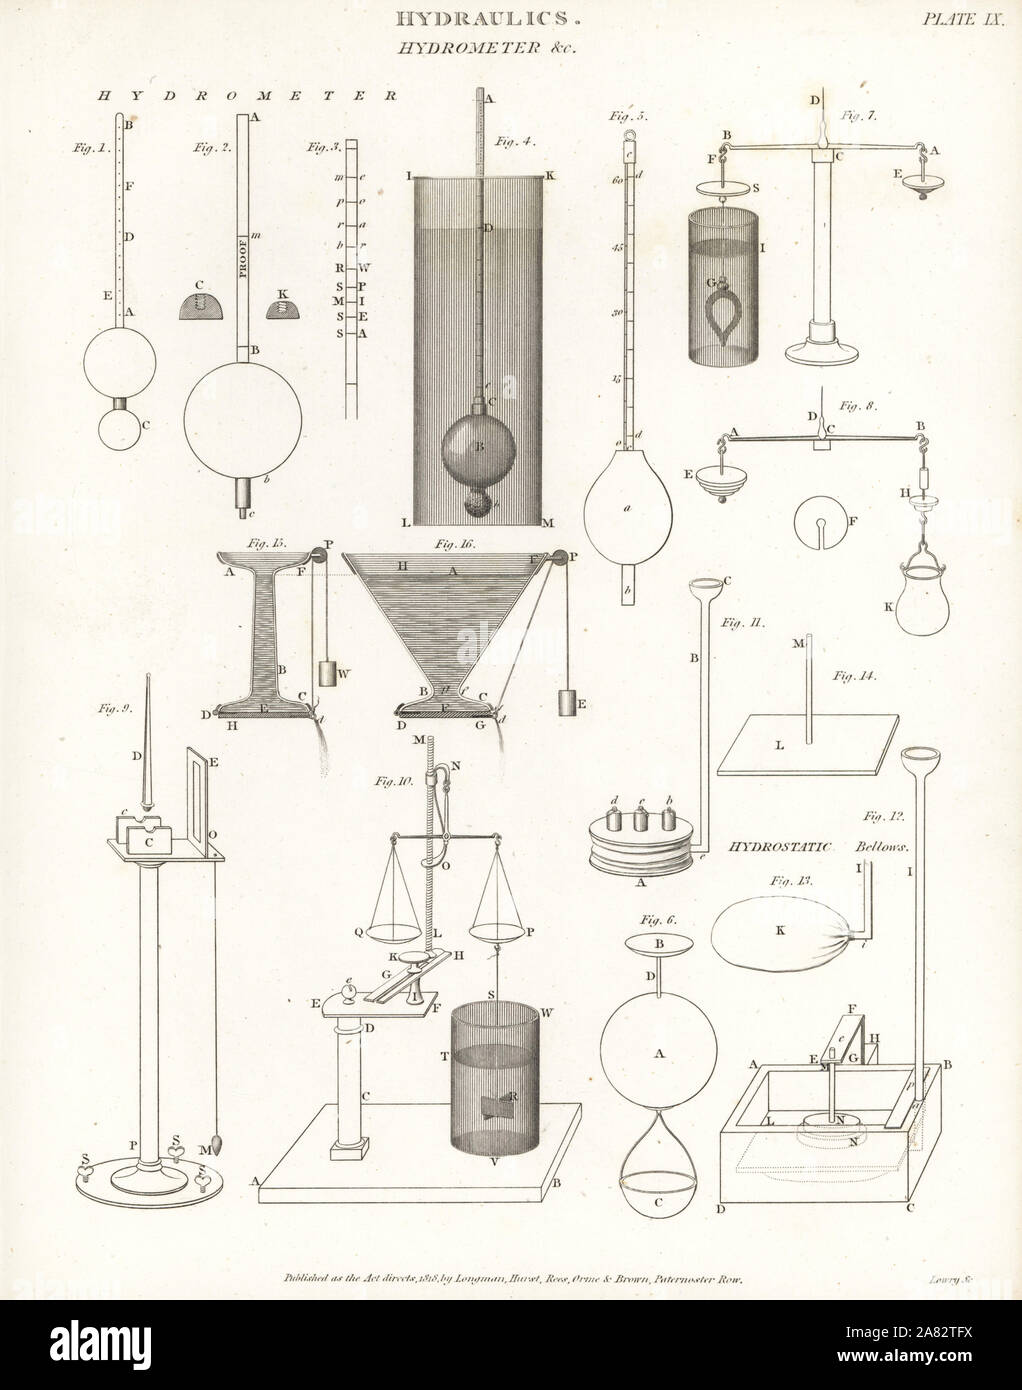 Types of hydrometers, 18th century, by Clark 2,3, John Theophilus Desaguliers 4, Jean-Andre De Luc 5, and William Nicholson 6. Copperplate engraving by Wilson Lowry from Abraham Rees' Cyclopedia or Universal Dictionary of Arts, Sciences and Literature, Longman, Hurst, Rees, Orme and Brown, London, 1818. Stock Photo